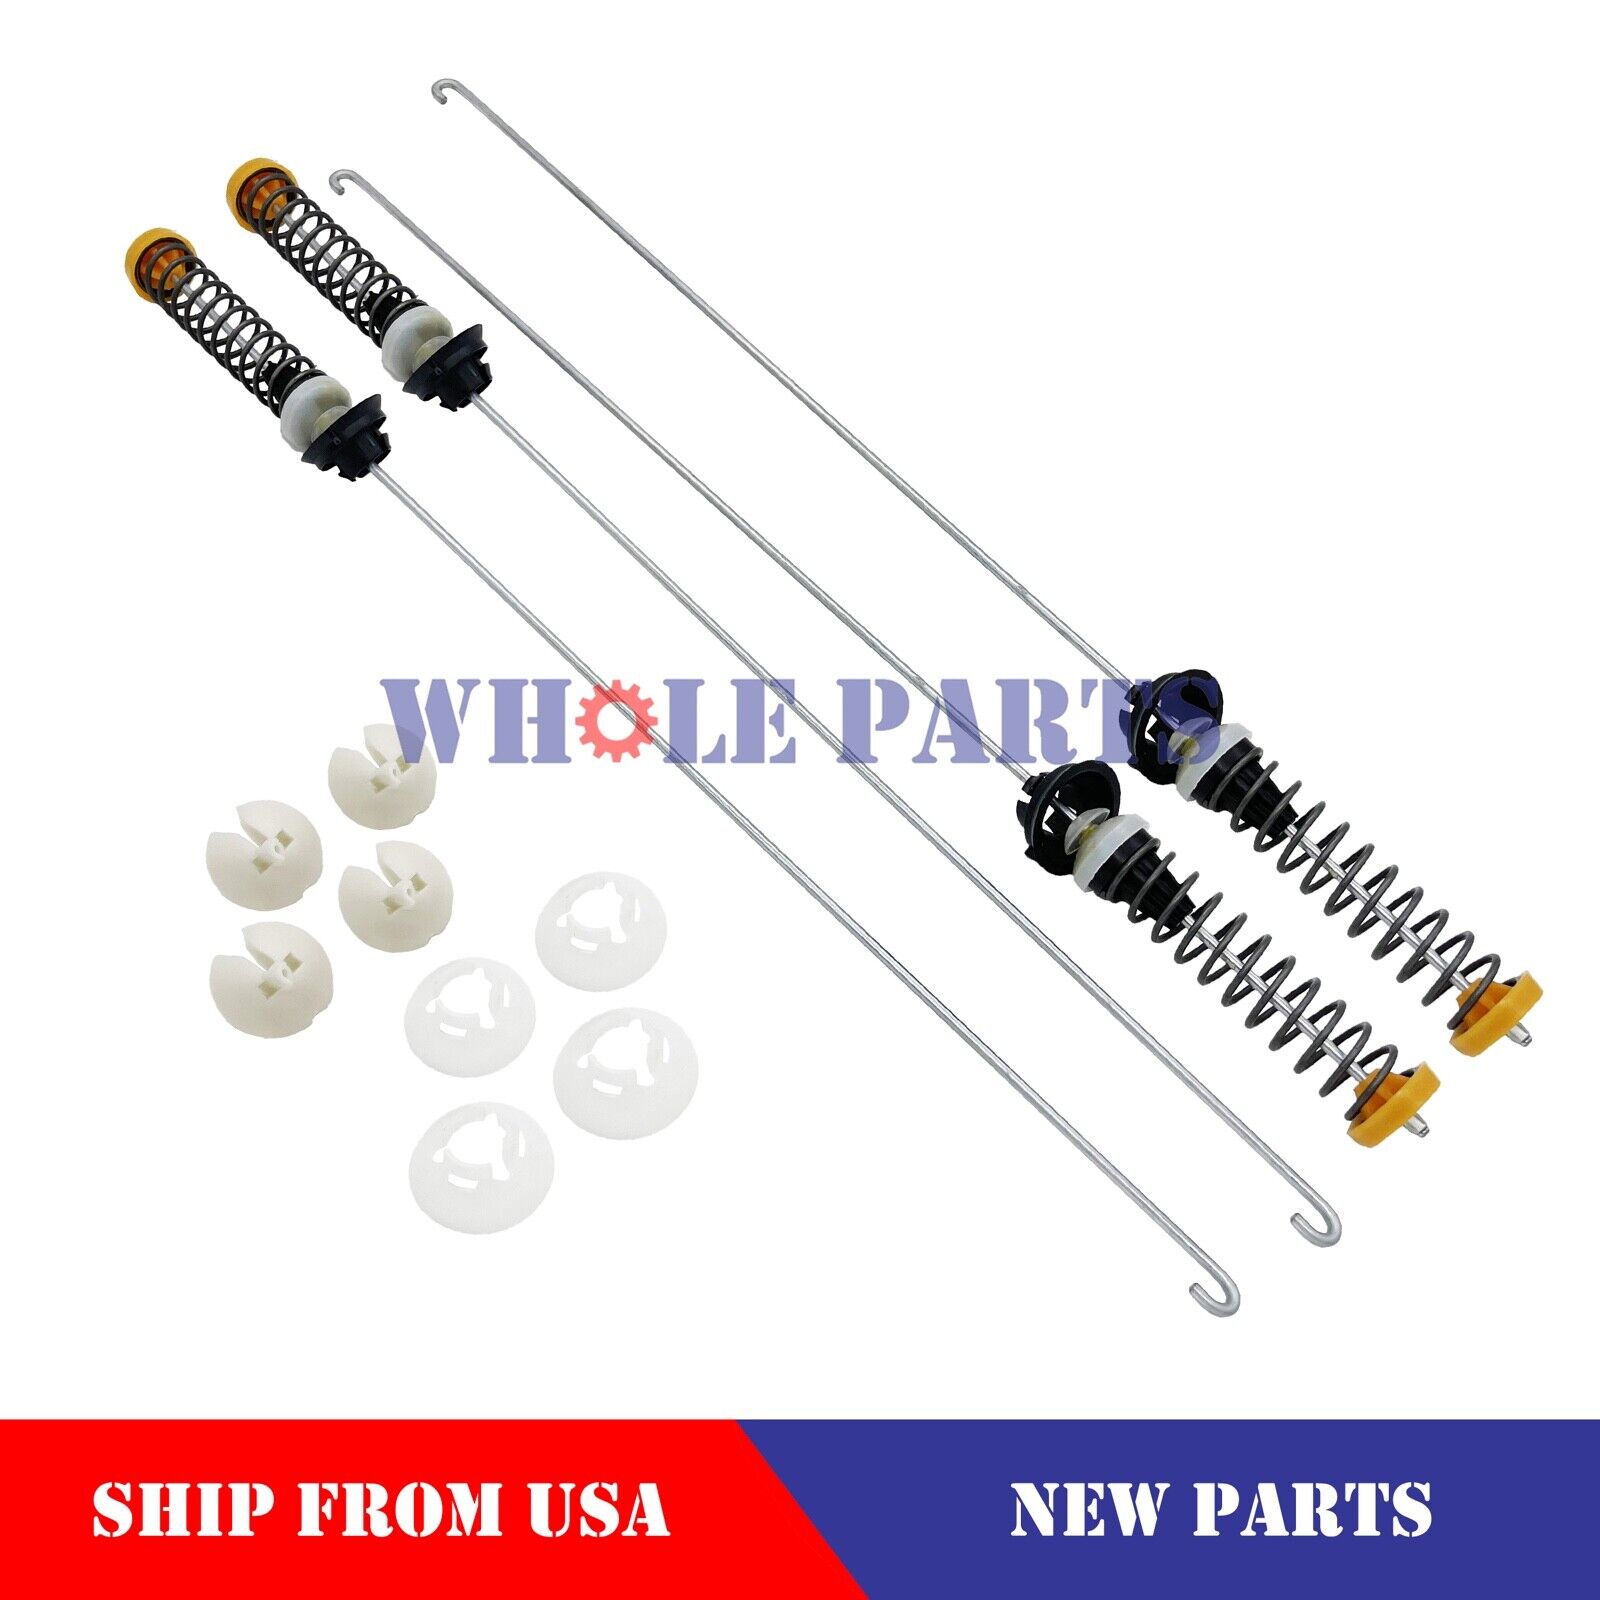 New W11130359 Washer Suspension Rod Kit (4-Set) for Whirlpool